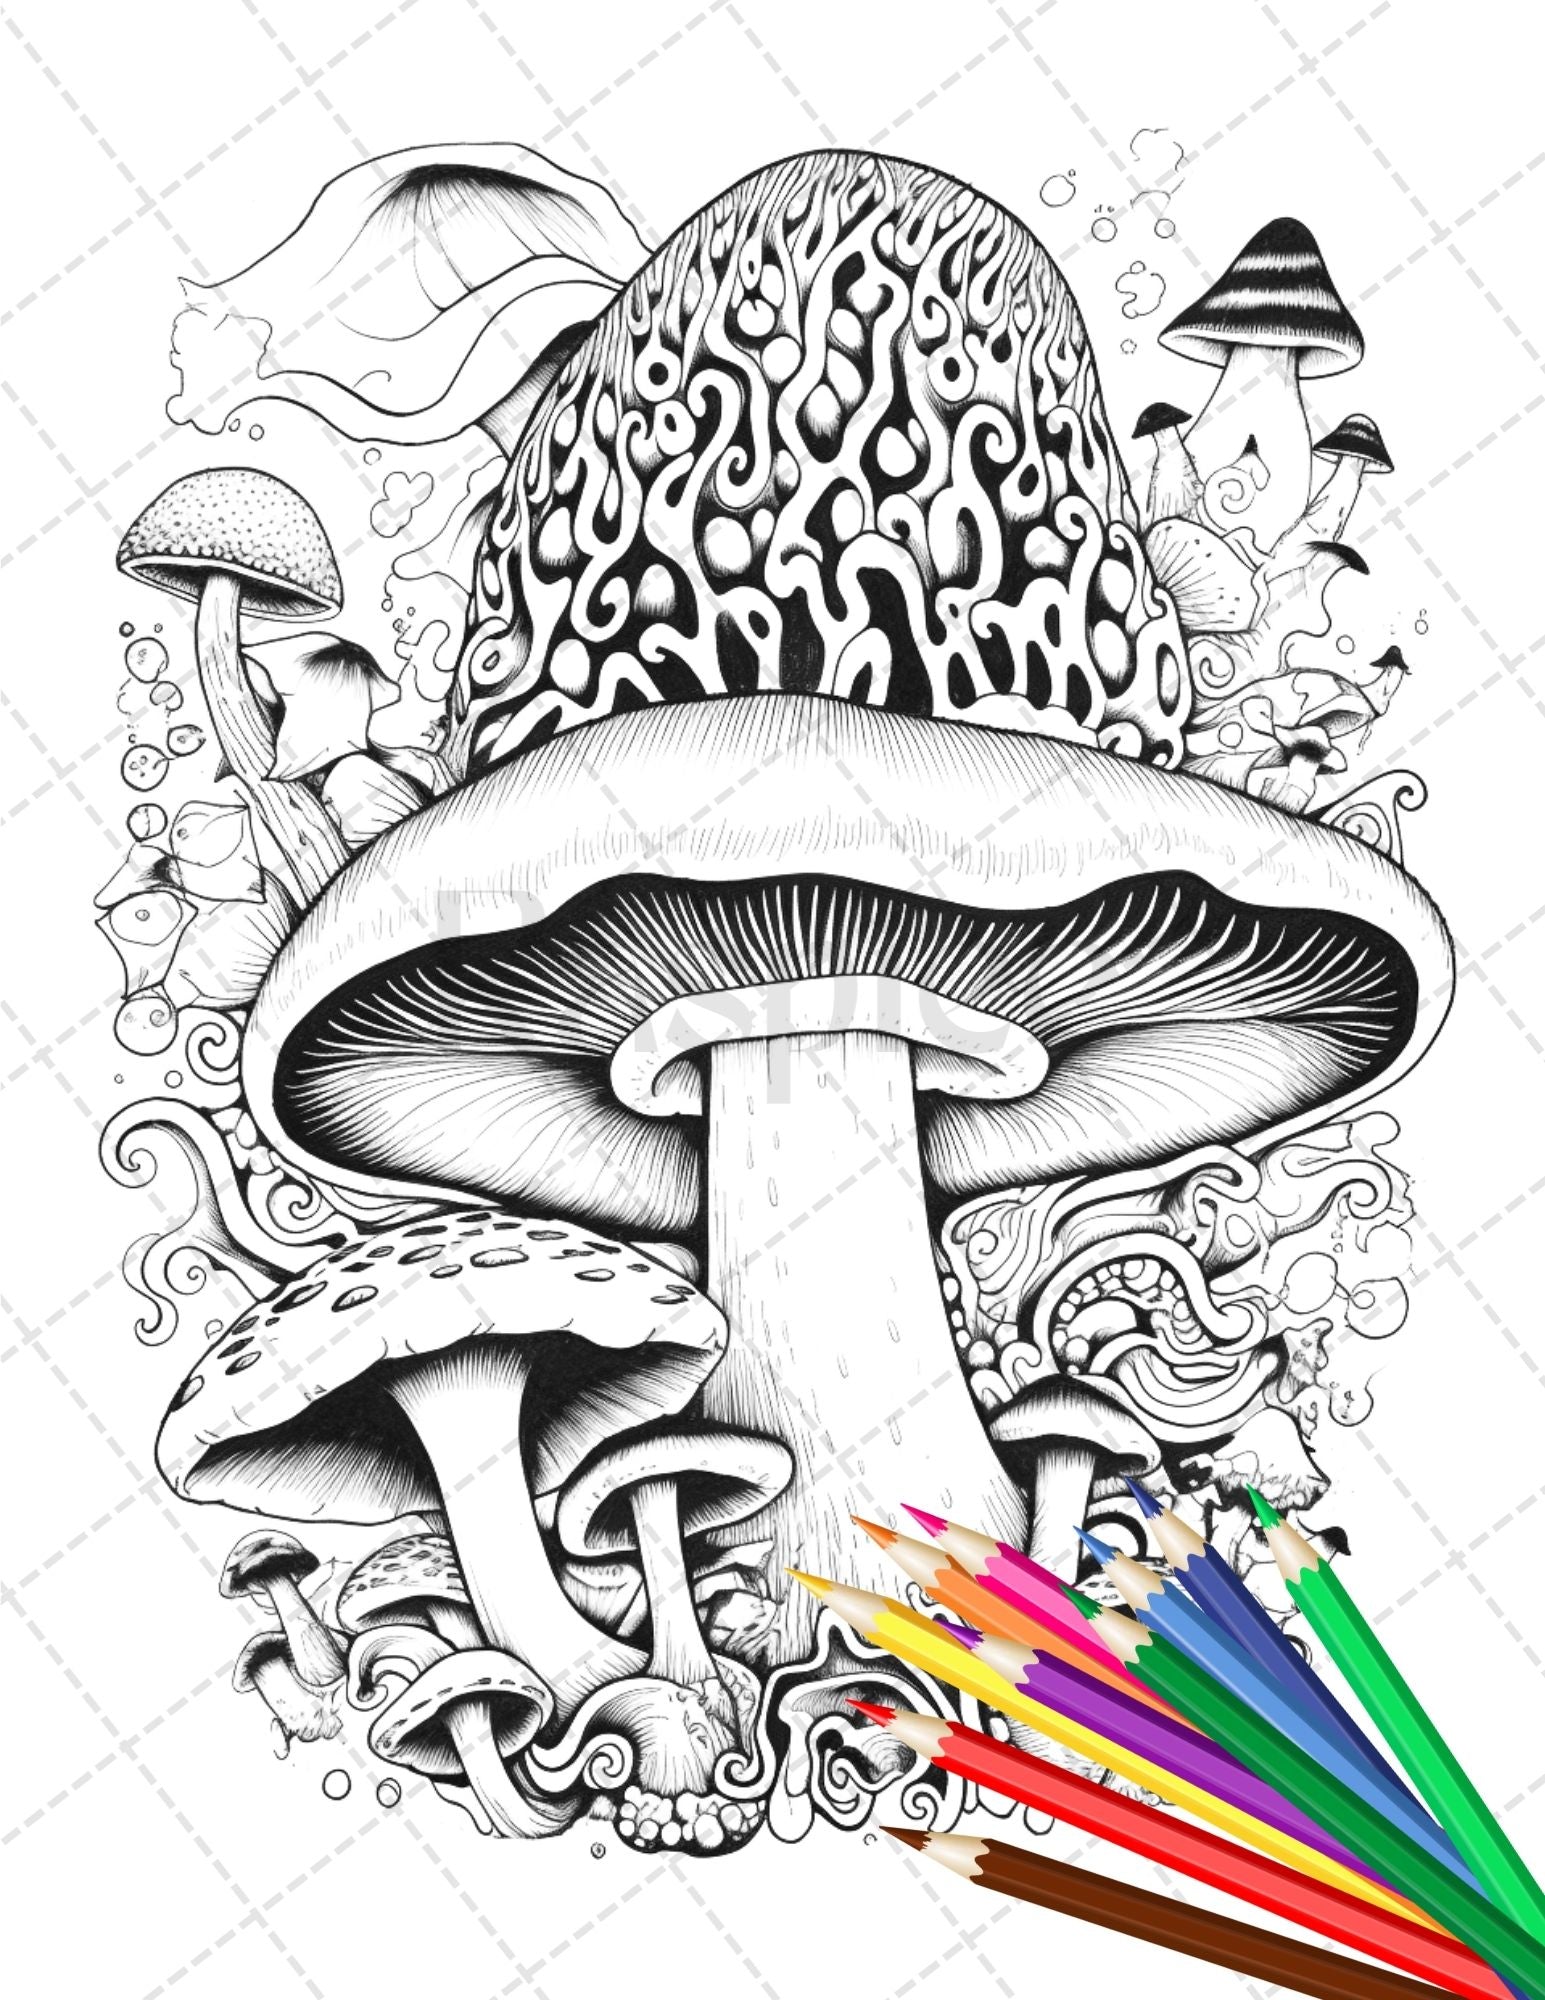 Psychedelic Mushroom Forest Coloring Book Printable for Adults, Trippy Grayscale Coloring Page, PDF File Instant Download - raspiee